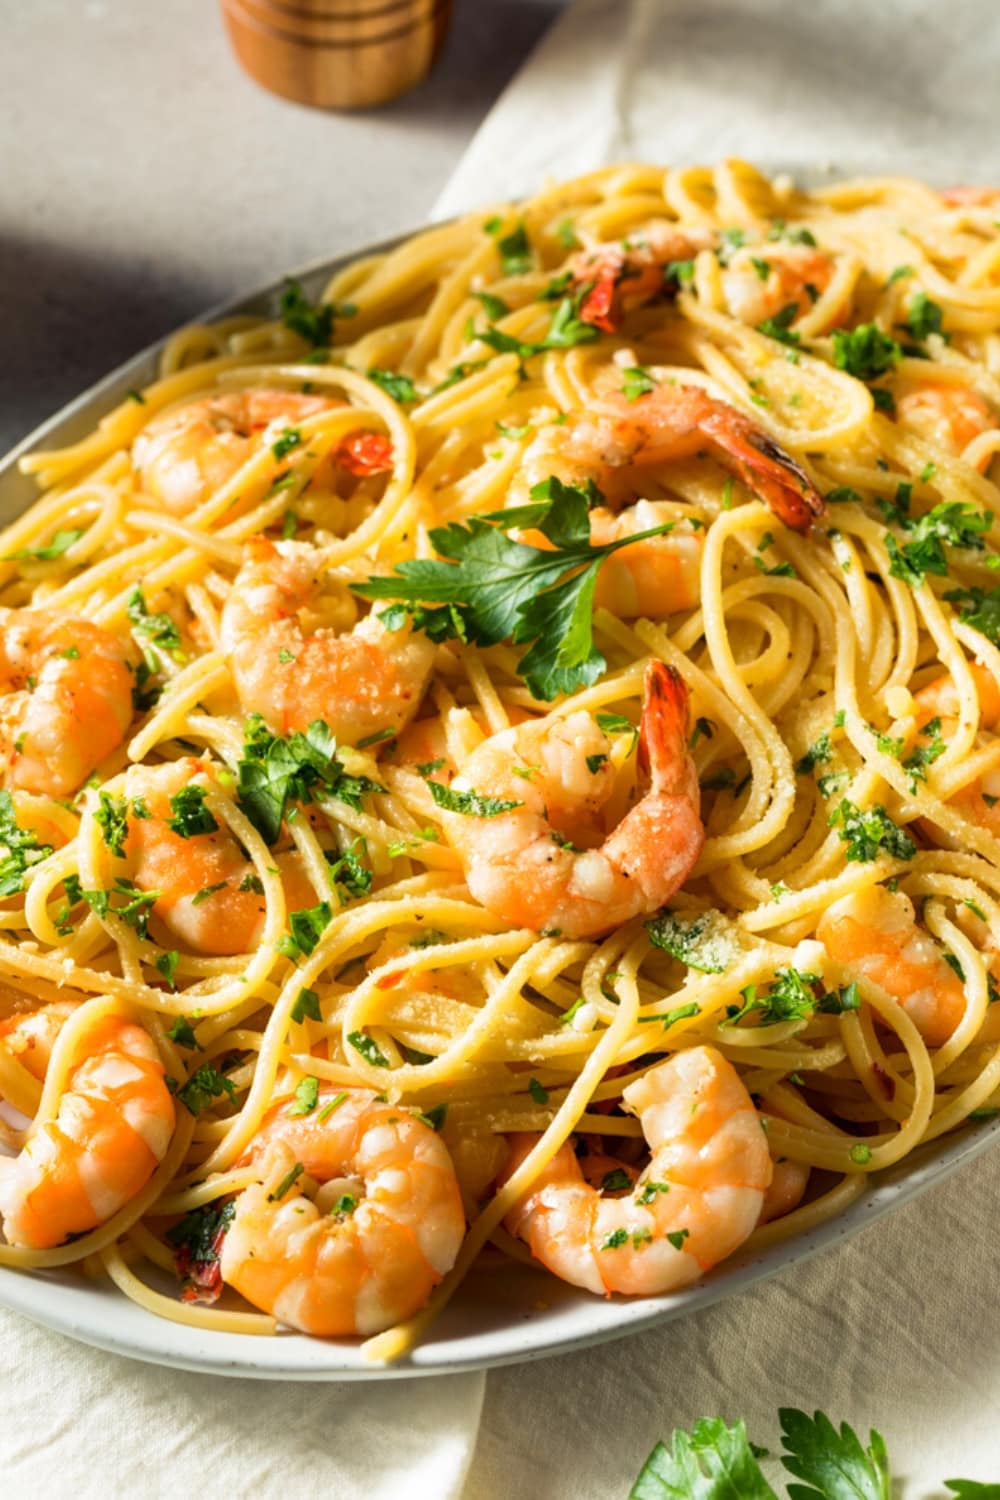 Noodles with Shrimp Scampi garnished with chopped parsley leaves.